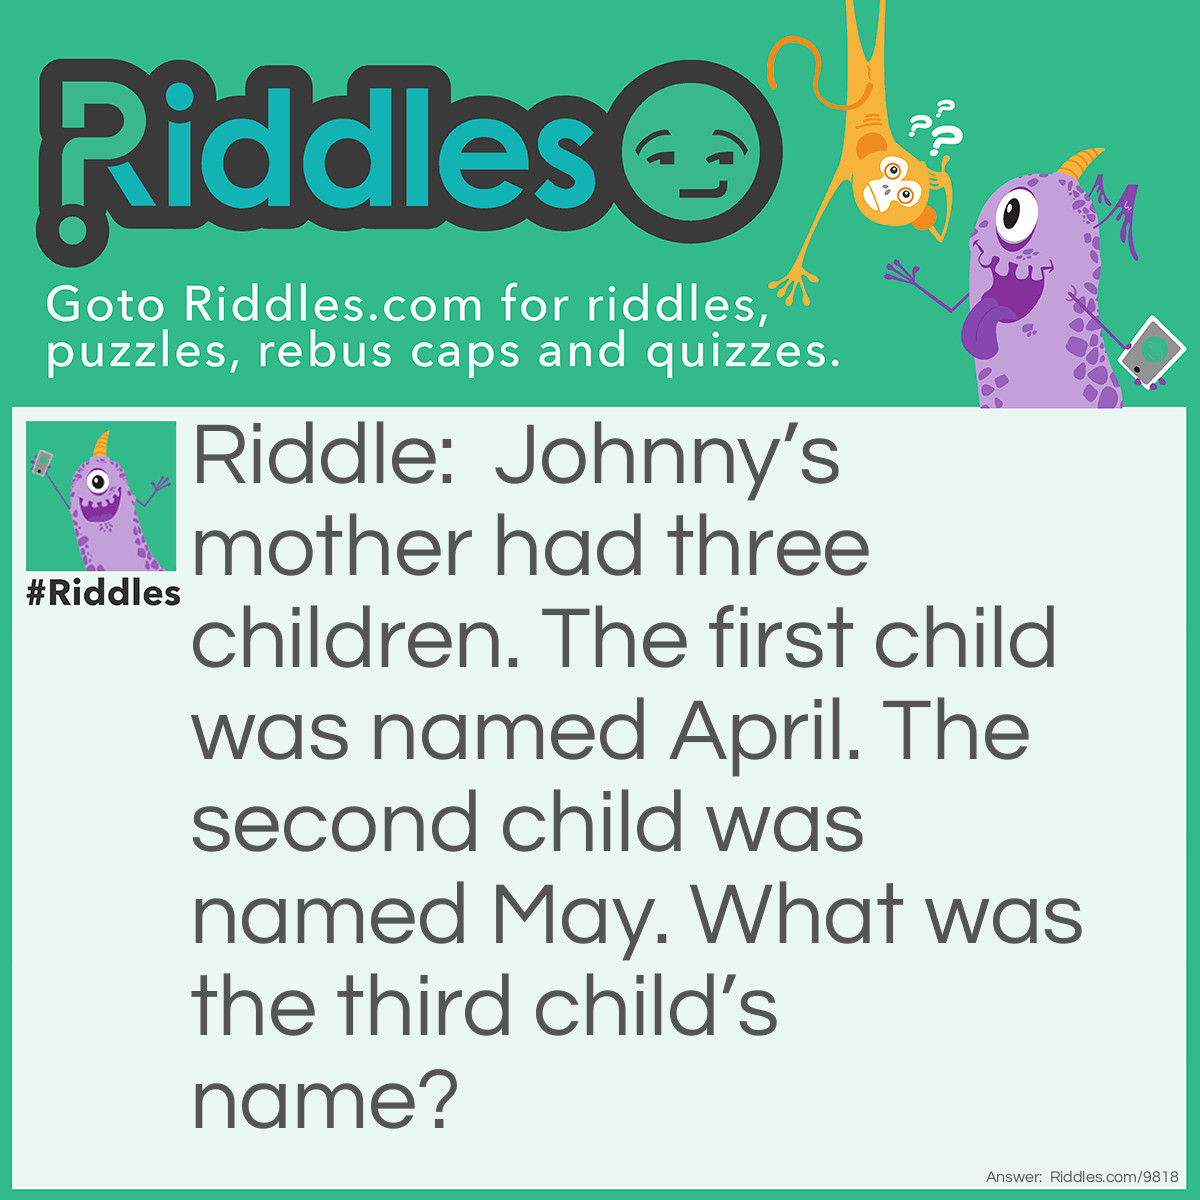 Riddle: Johnny's mother had three children. The first child was named April. The second child was named May. What was the third child's name? Answer: Johnny.